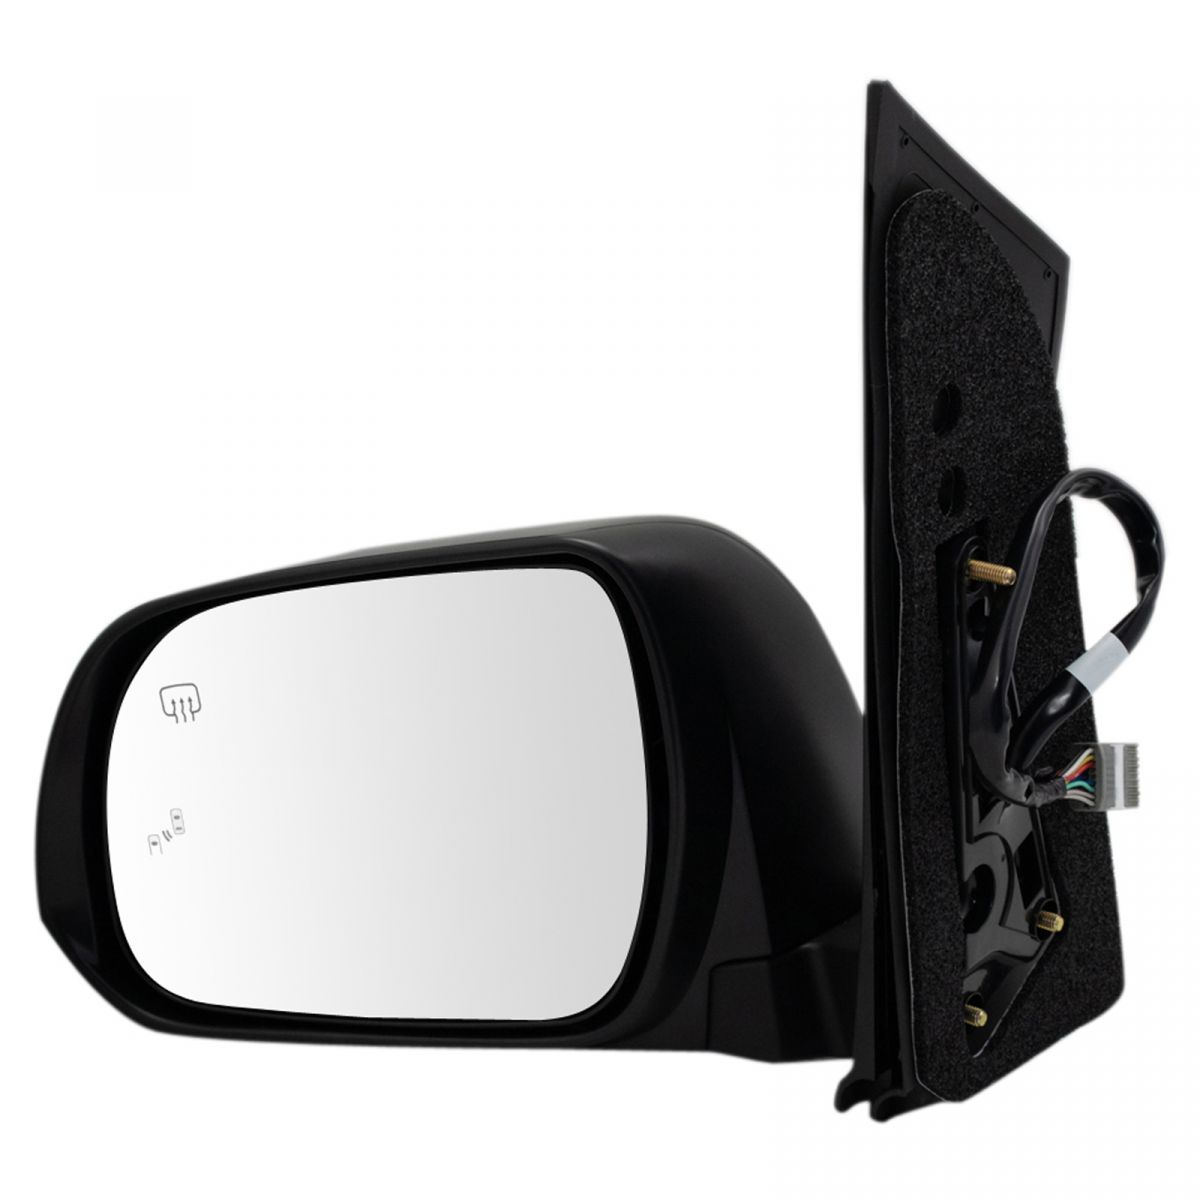 Heated Power Memory Mirror with Turn signal Driver Side LH for Toyota Sienna New | eBay 2006 Toyota Sienna Side Mirror With Turn Signal